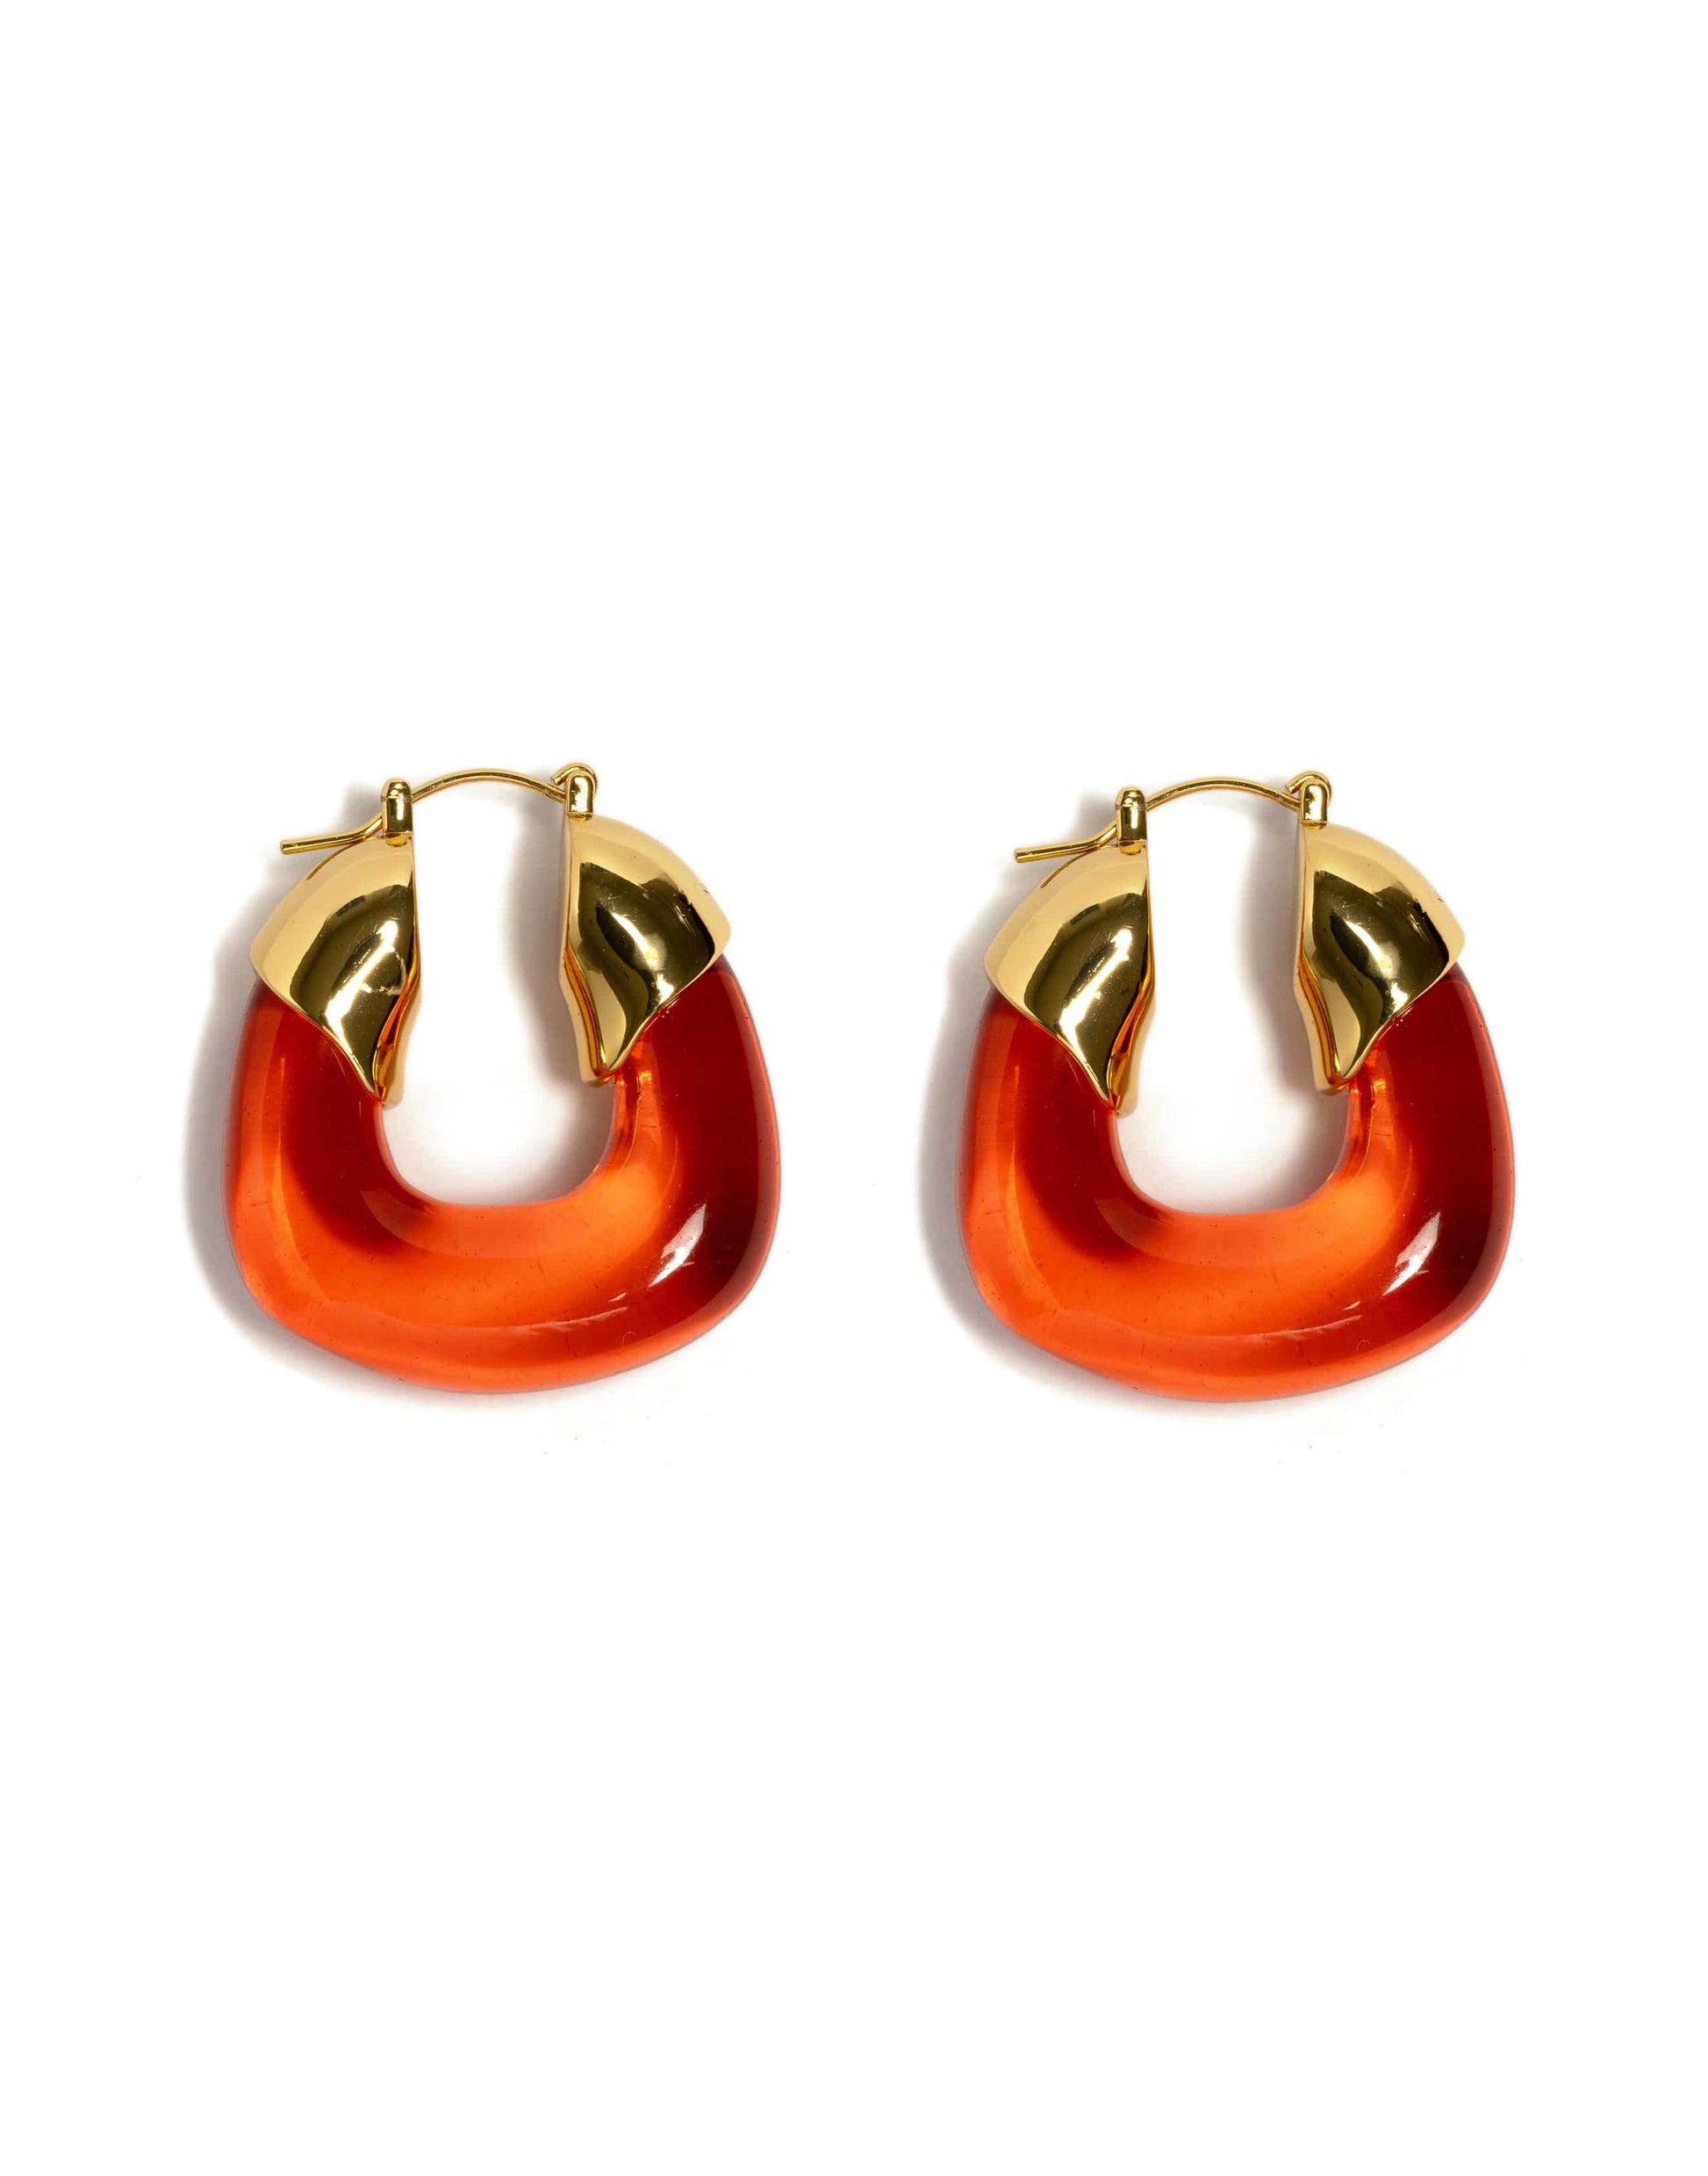 Organic Hoops - Persimmon JEWELRYBOUTIQUEEARRING LIZZIE FORTUNATO   